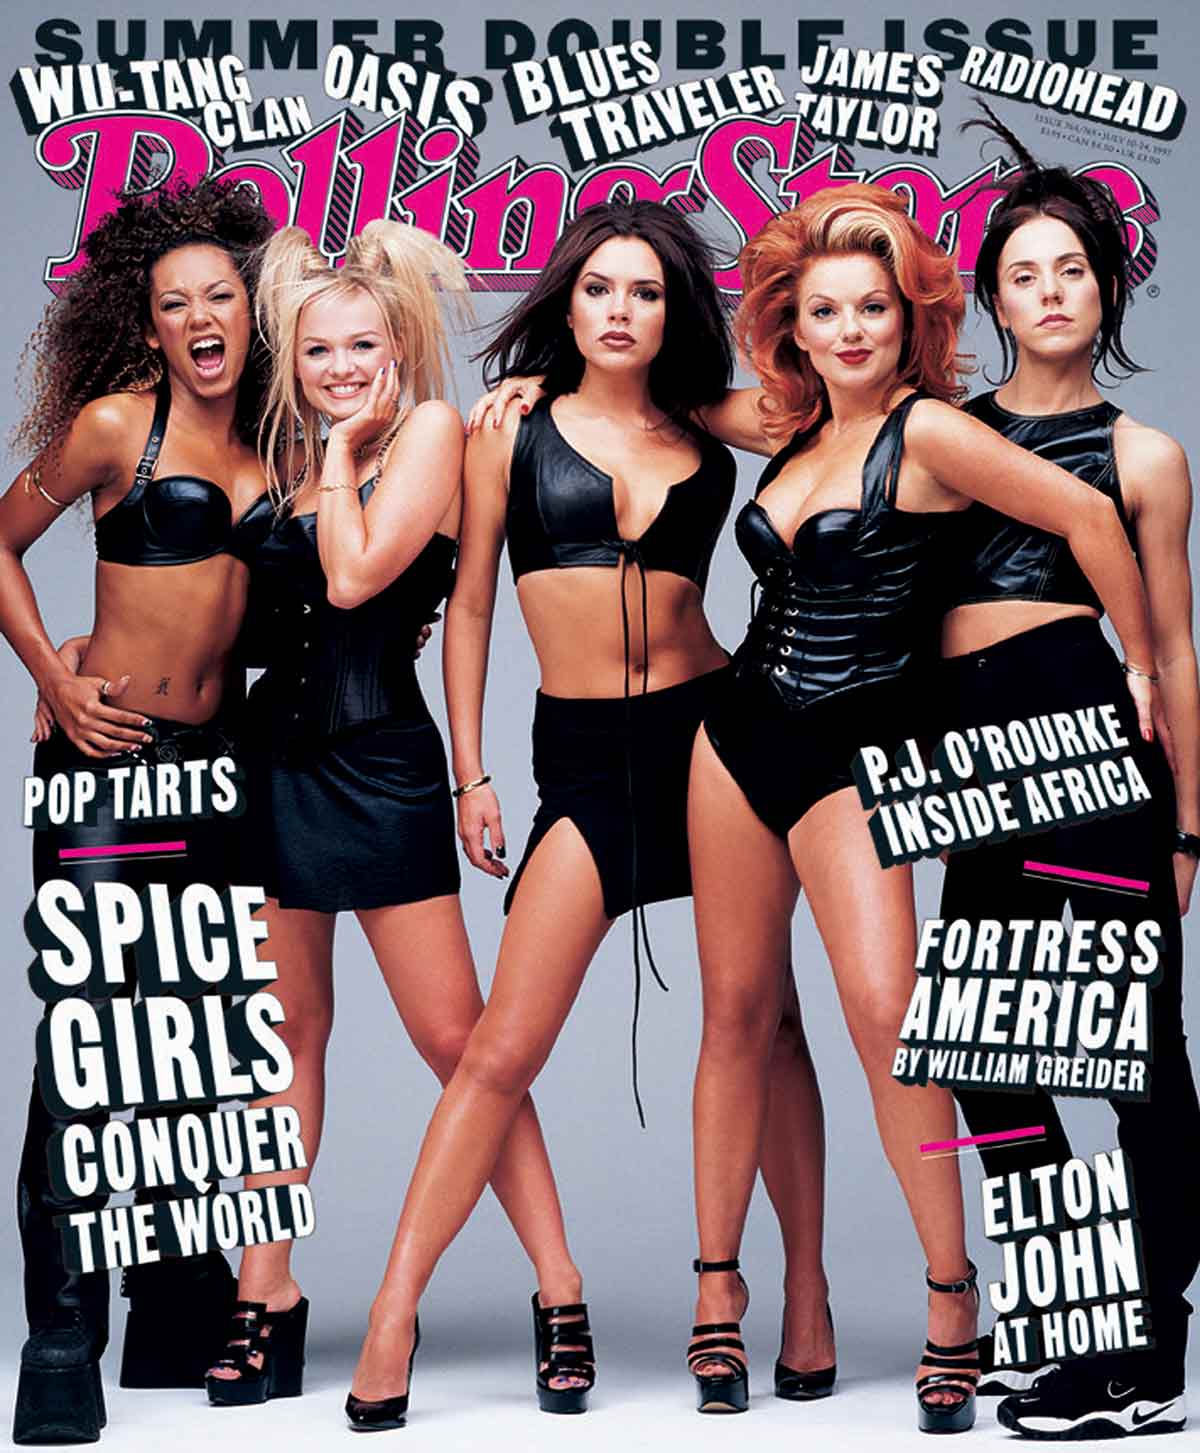 A Rolling Stones cover featuring The Spice Girls.